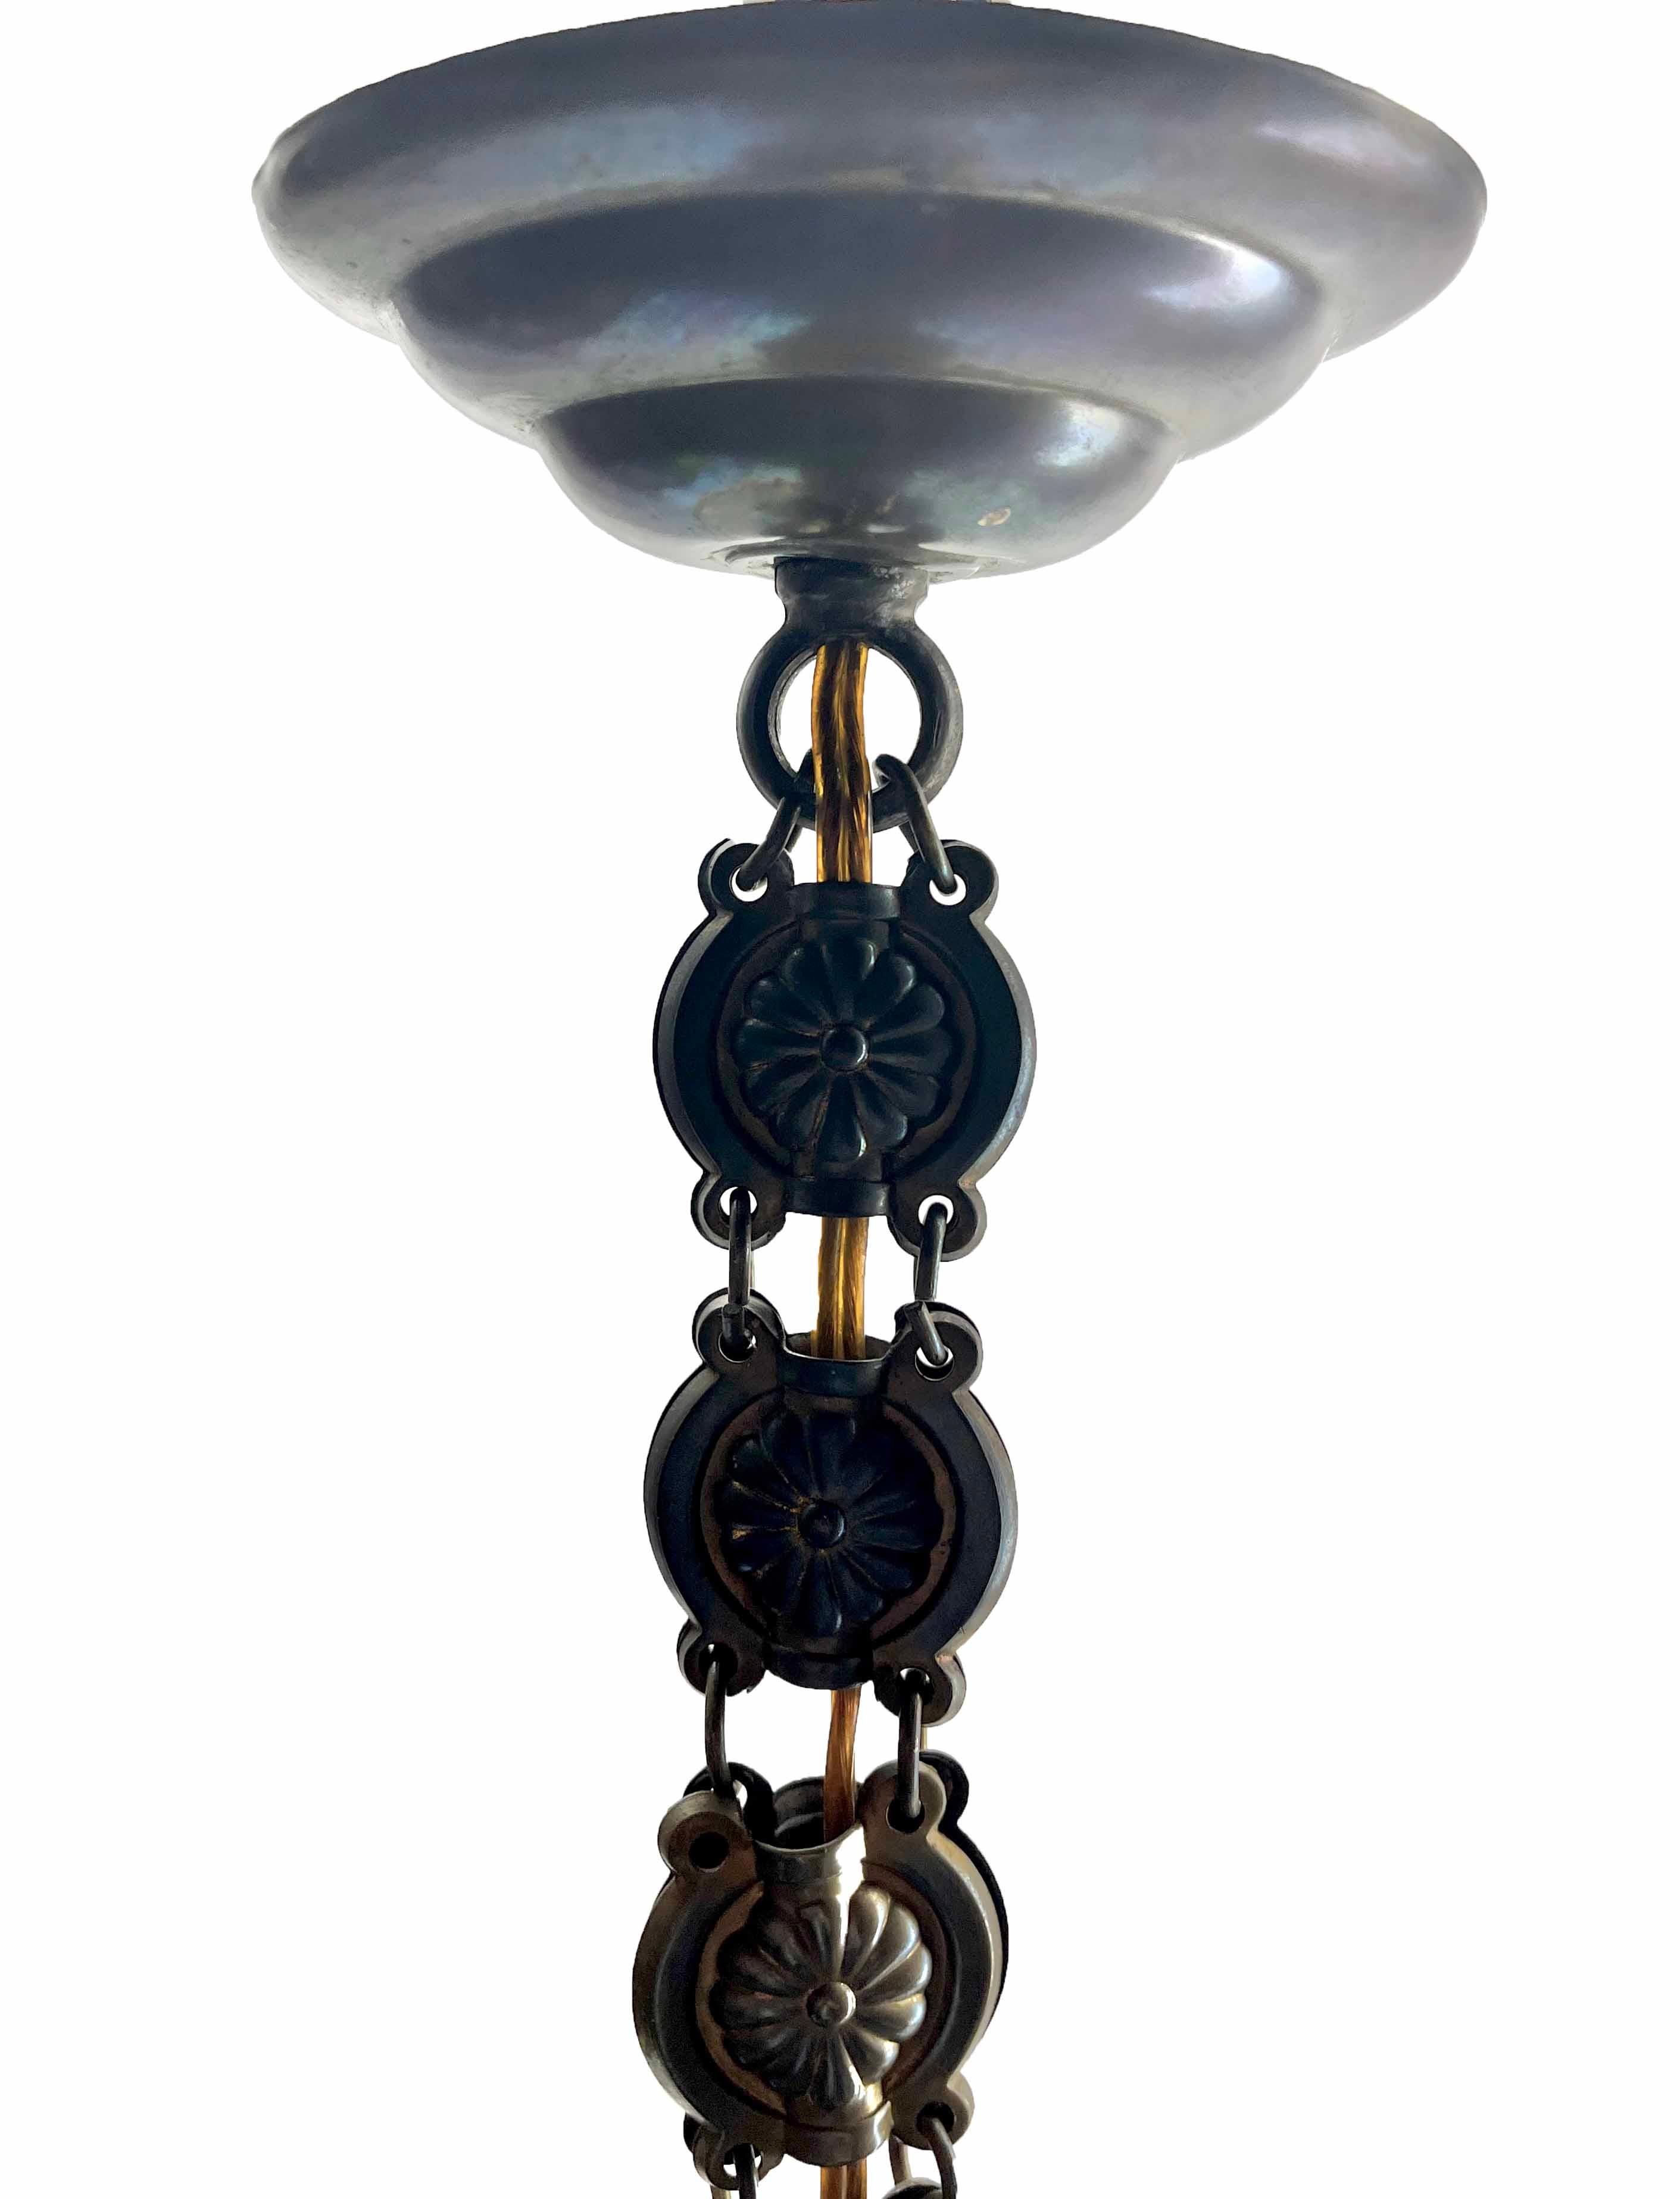 Early 20th Century Art Nouveau Chandelier Attributed to Luneville France, 1900s For Sale